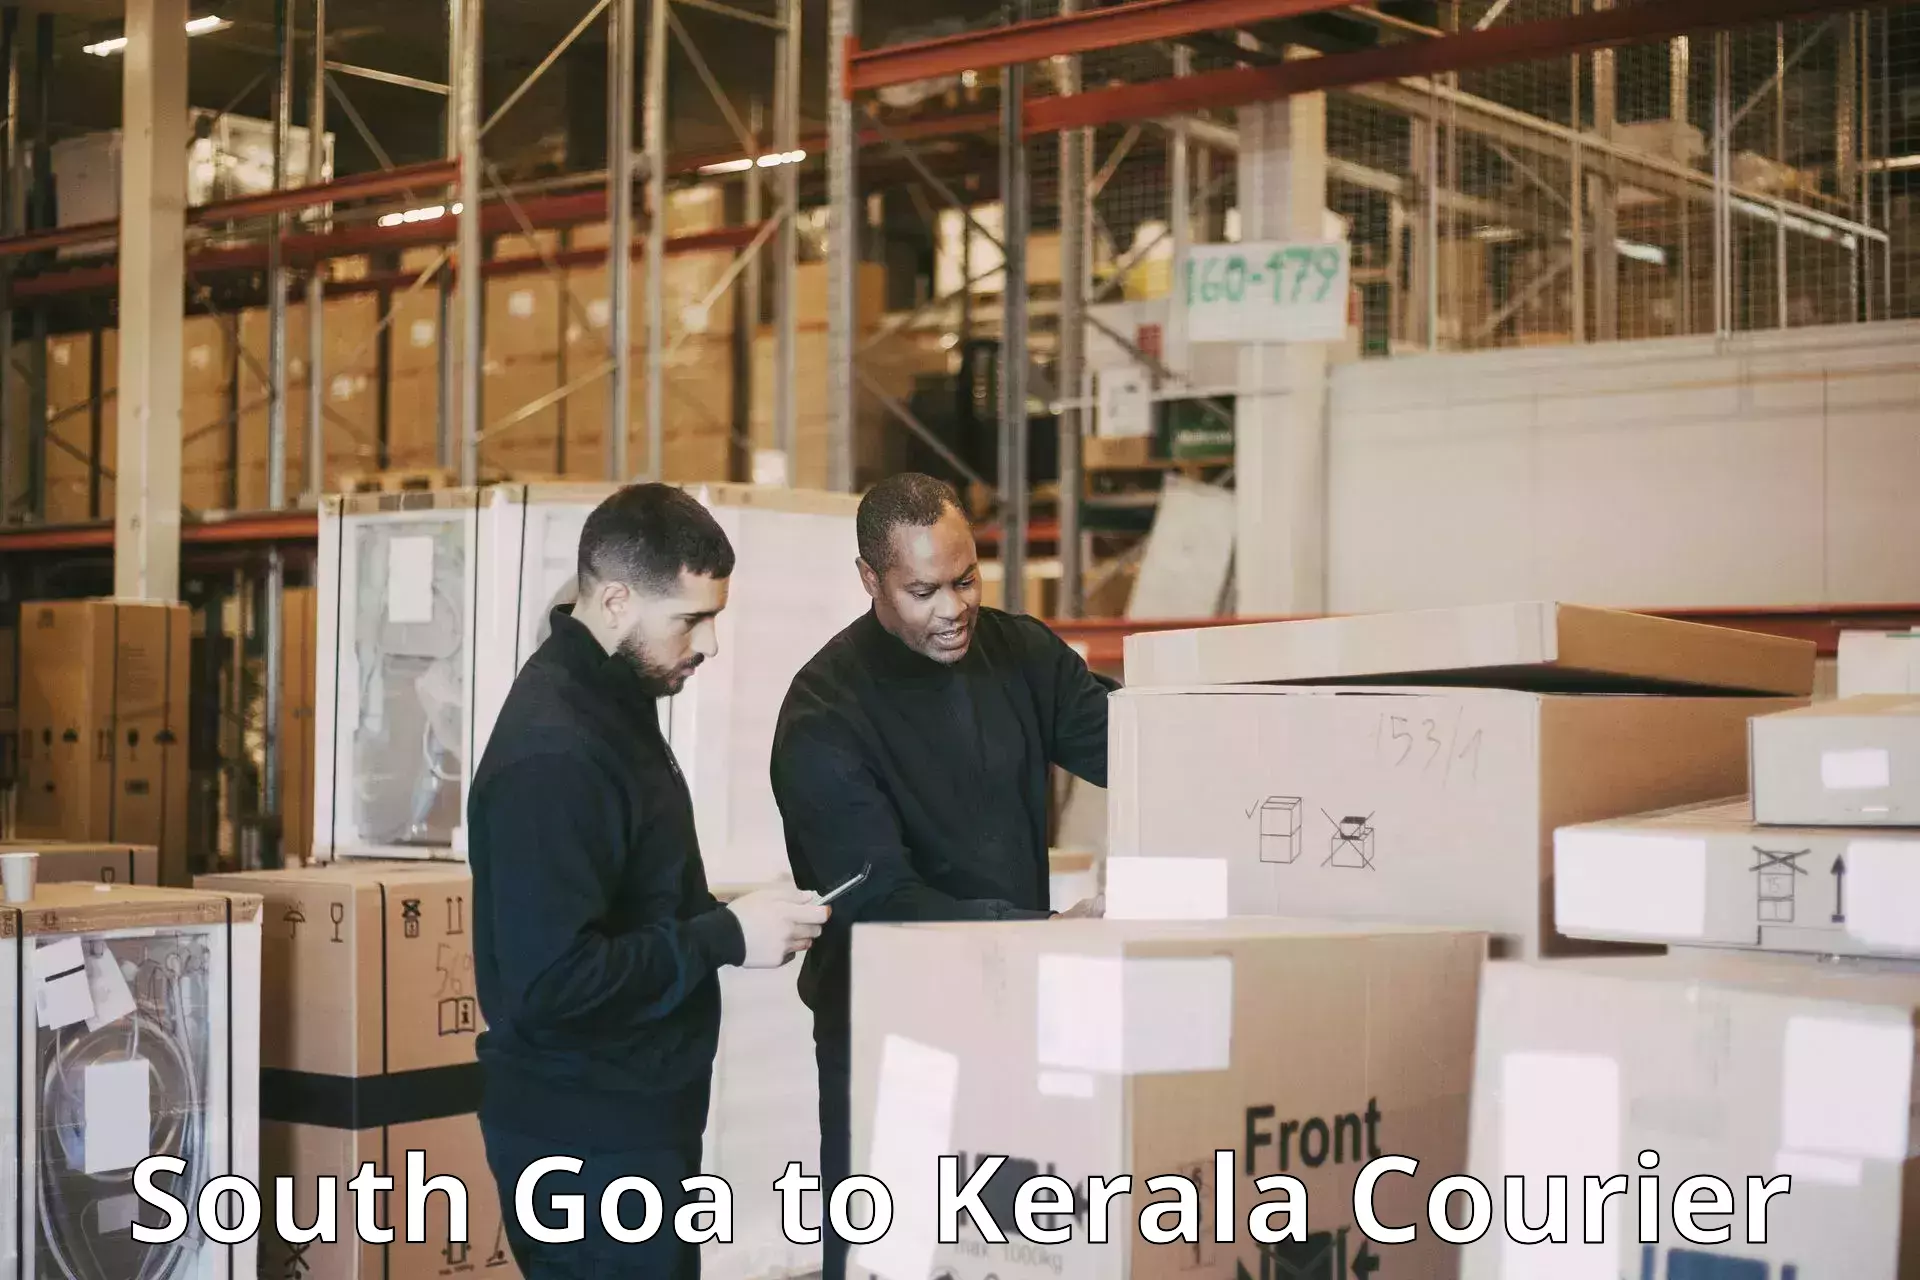 Courier service booking South Goa to Vaikom